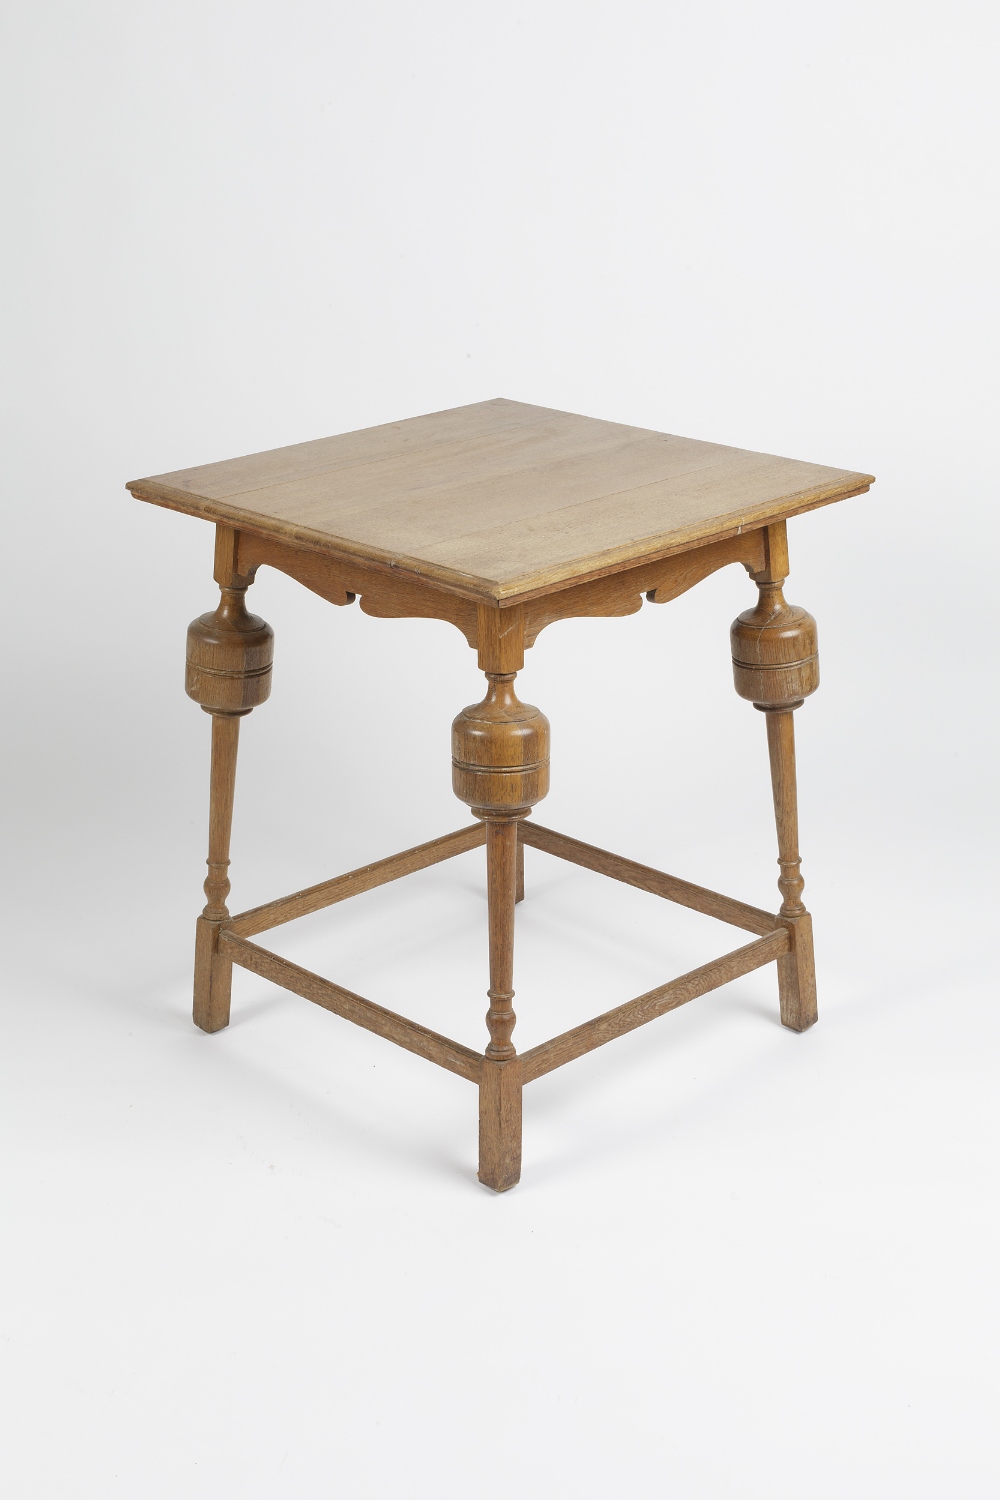 In the manner of Heals square occasional table, the legs with bulbous top, oak 61cm x 71cm